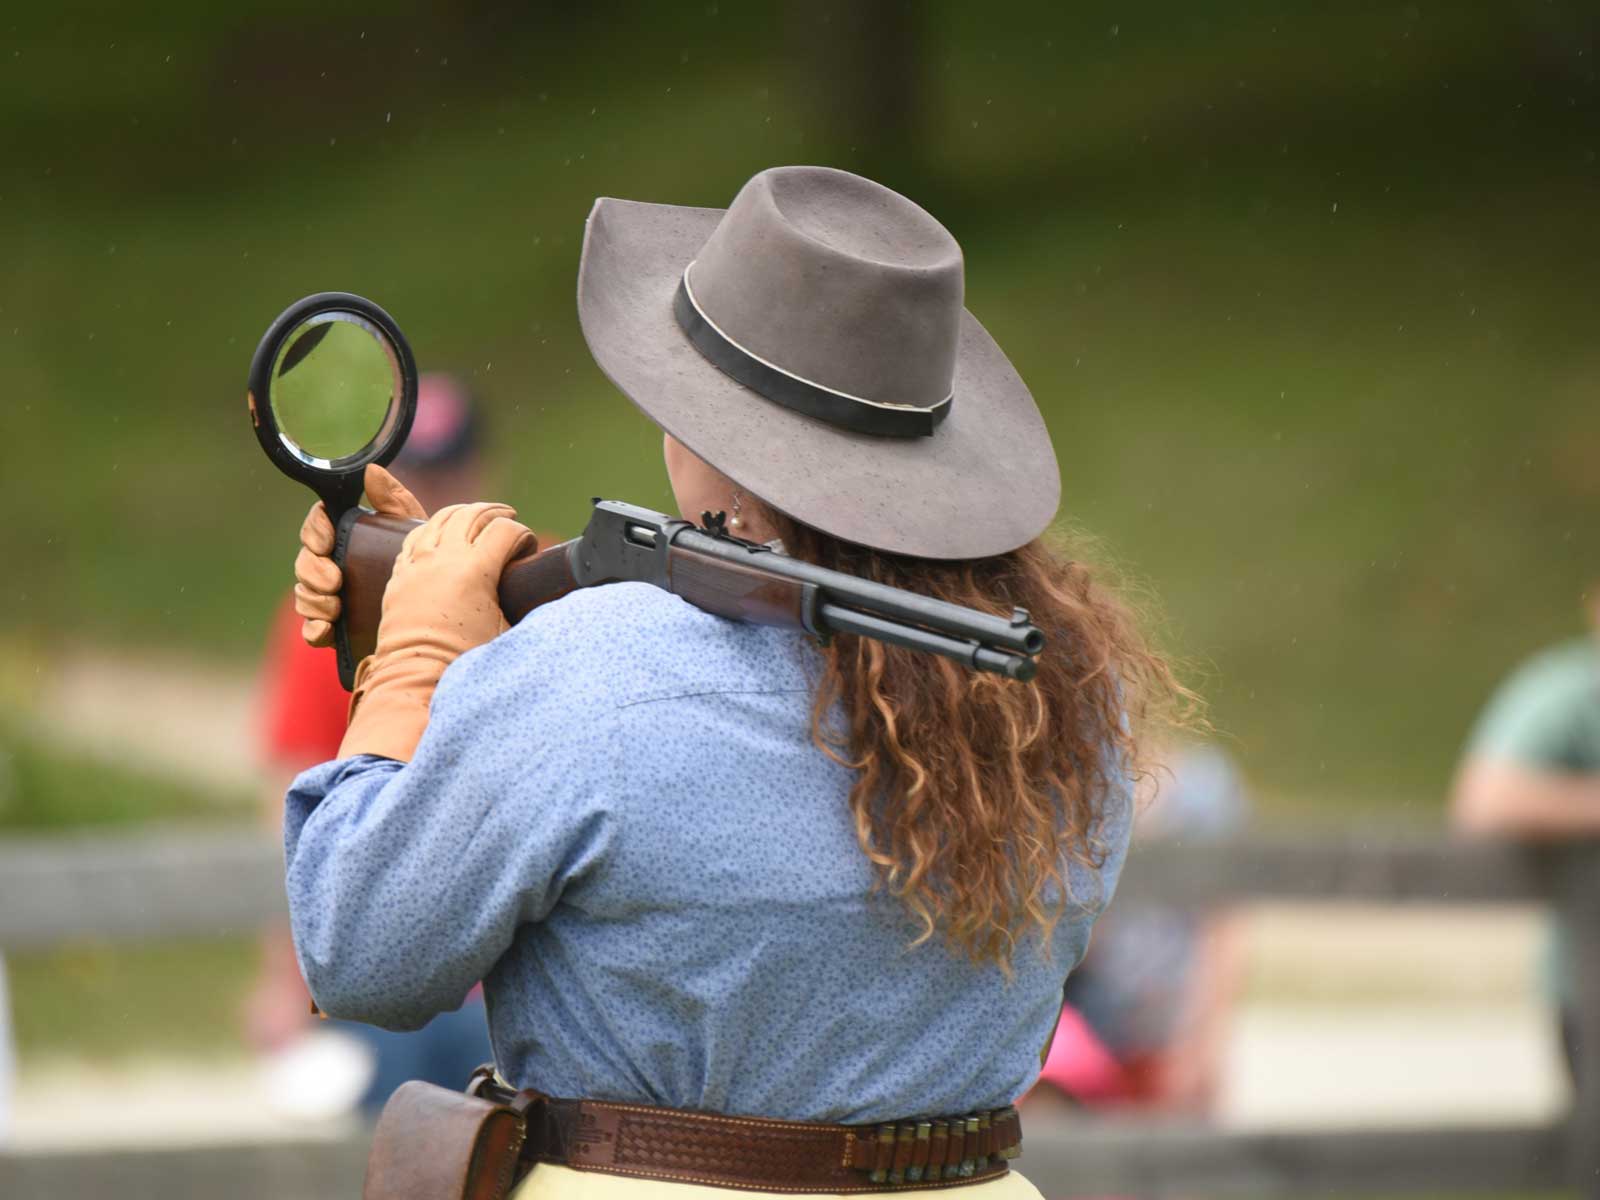 woman holding a mirror and gun for a behind-the-back trick shot at the Buffalo Bill Wild West Show